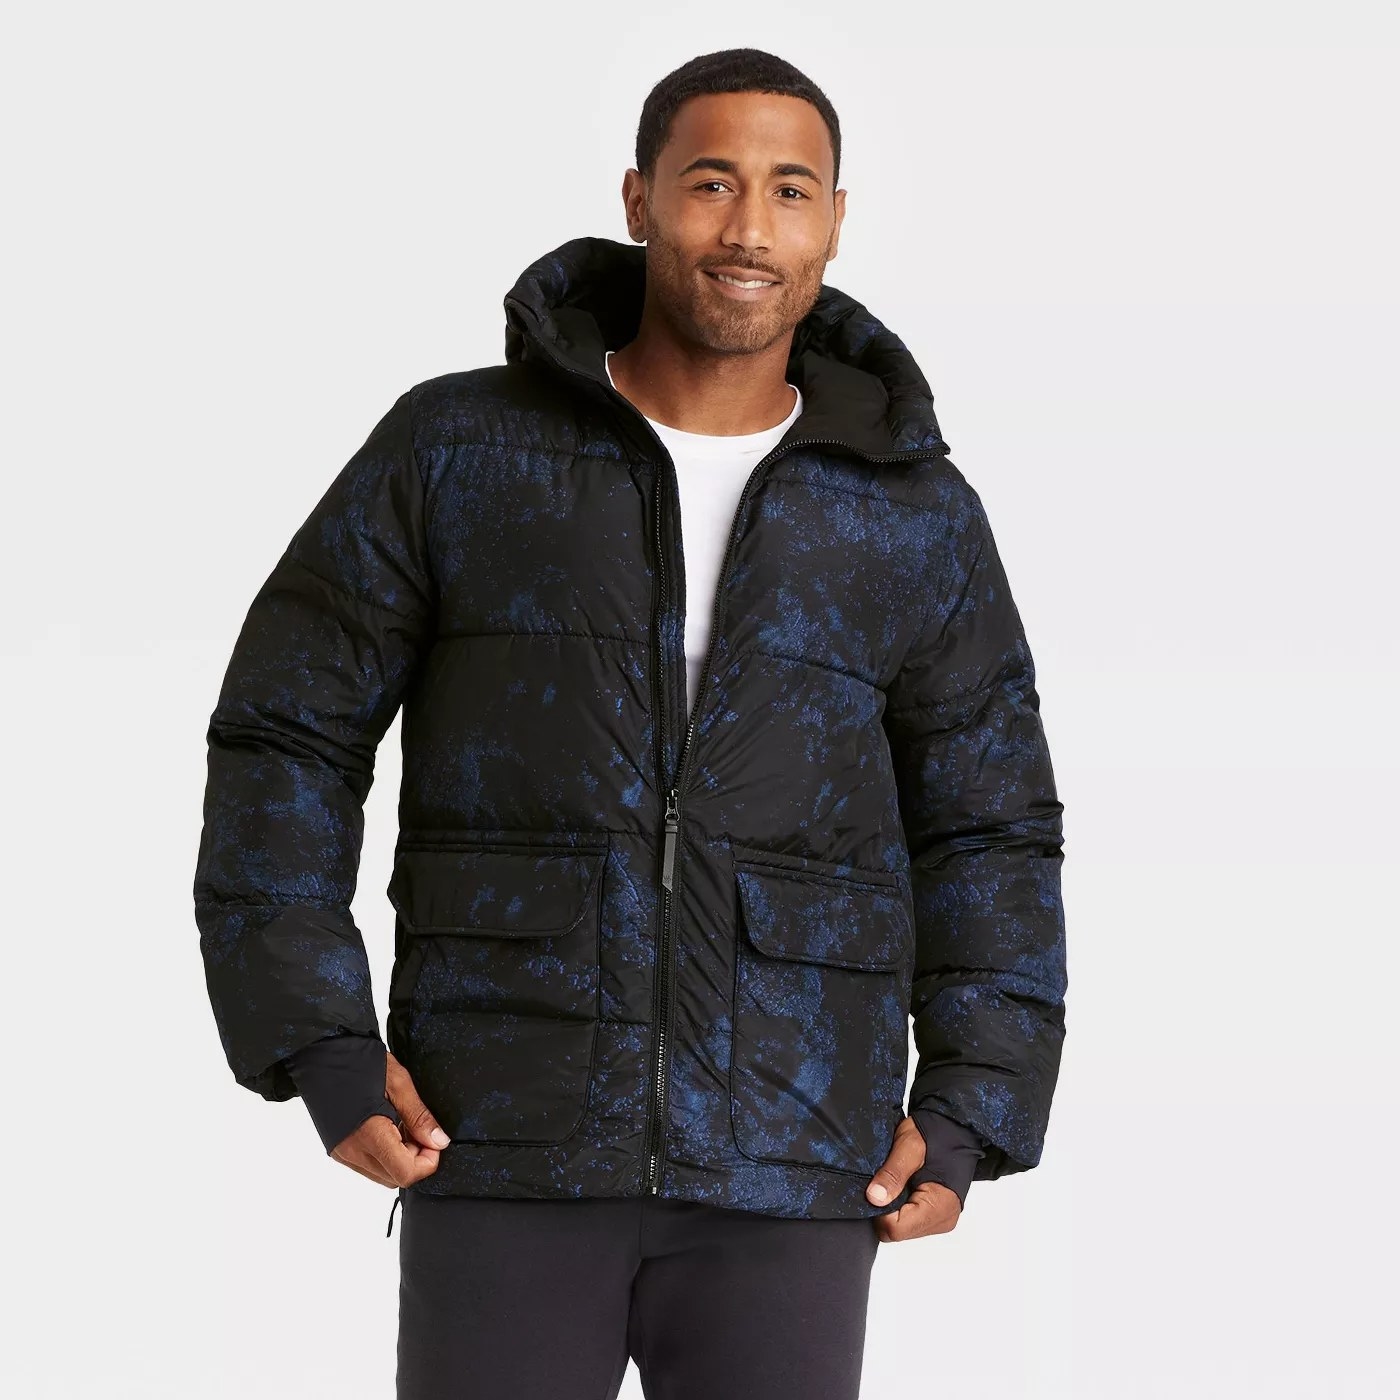 A blue and black puffer jacket